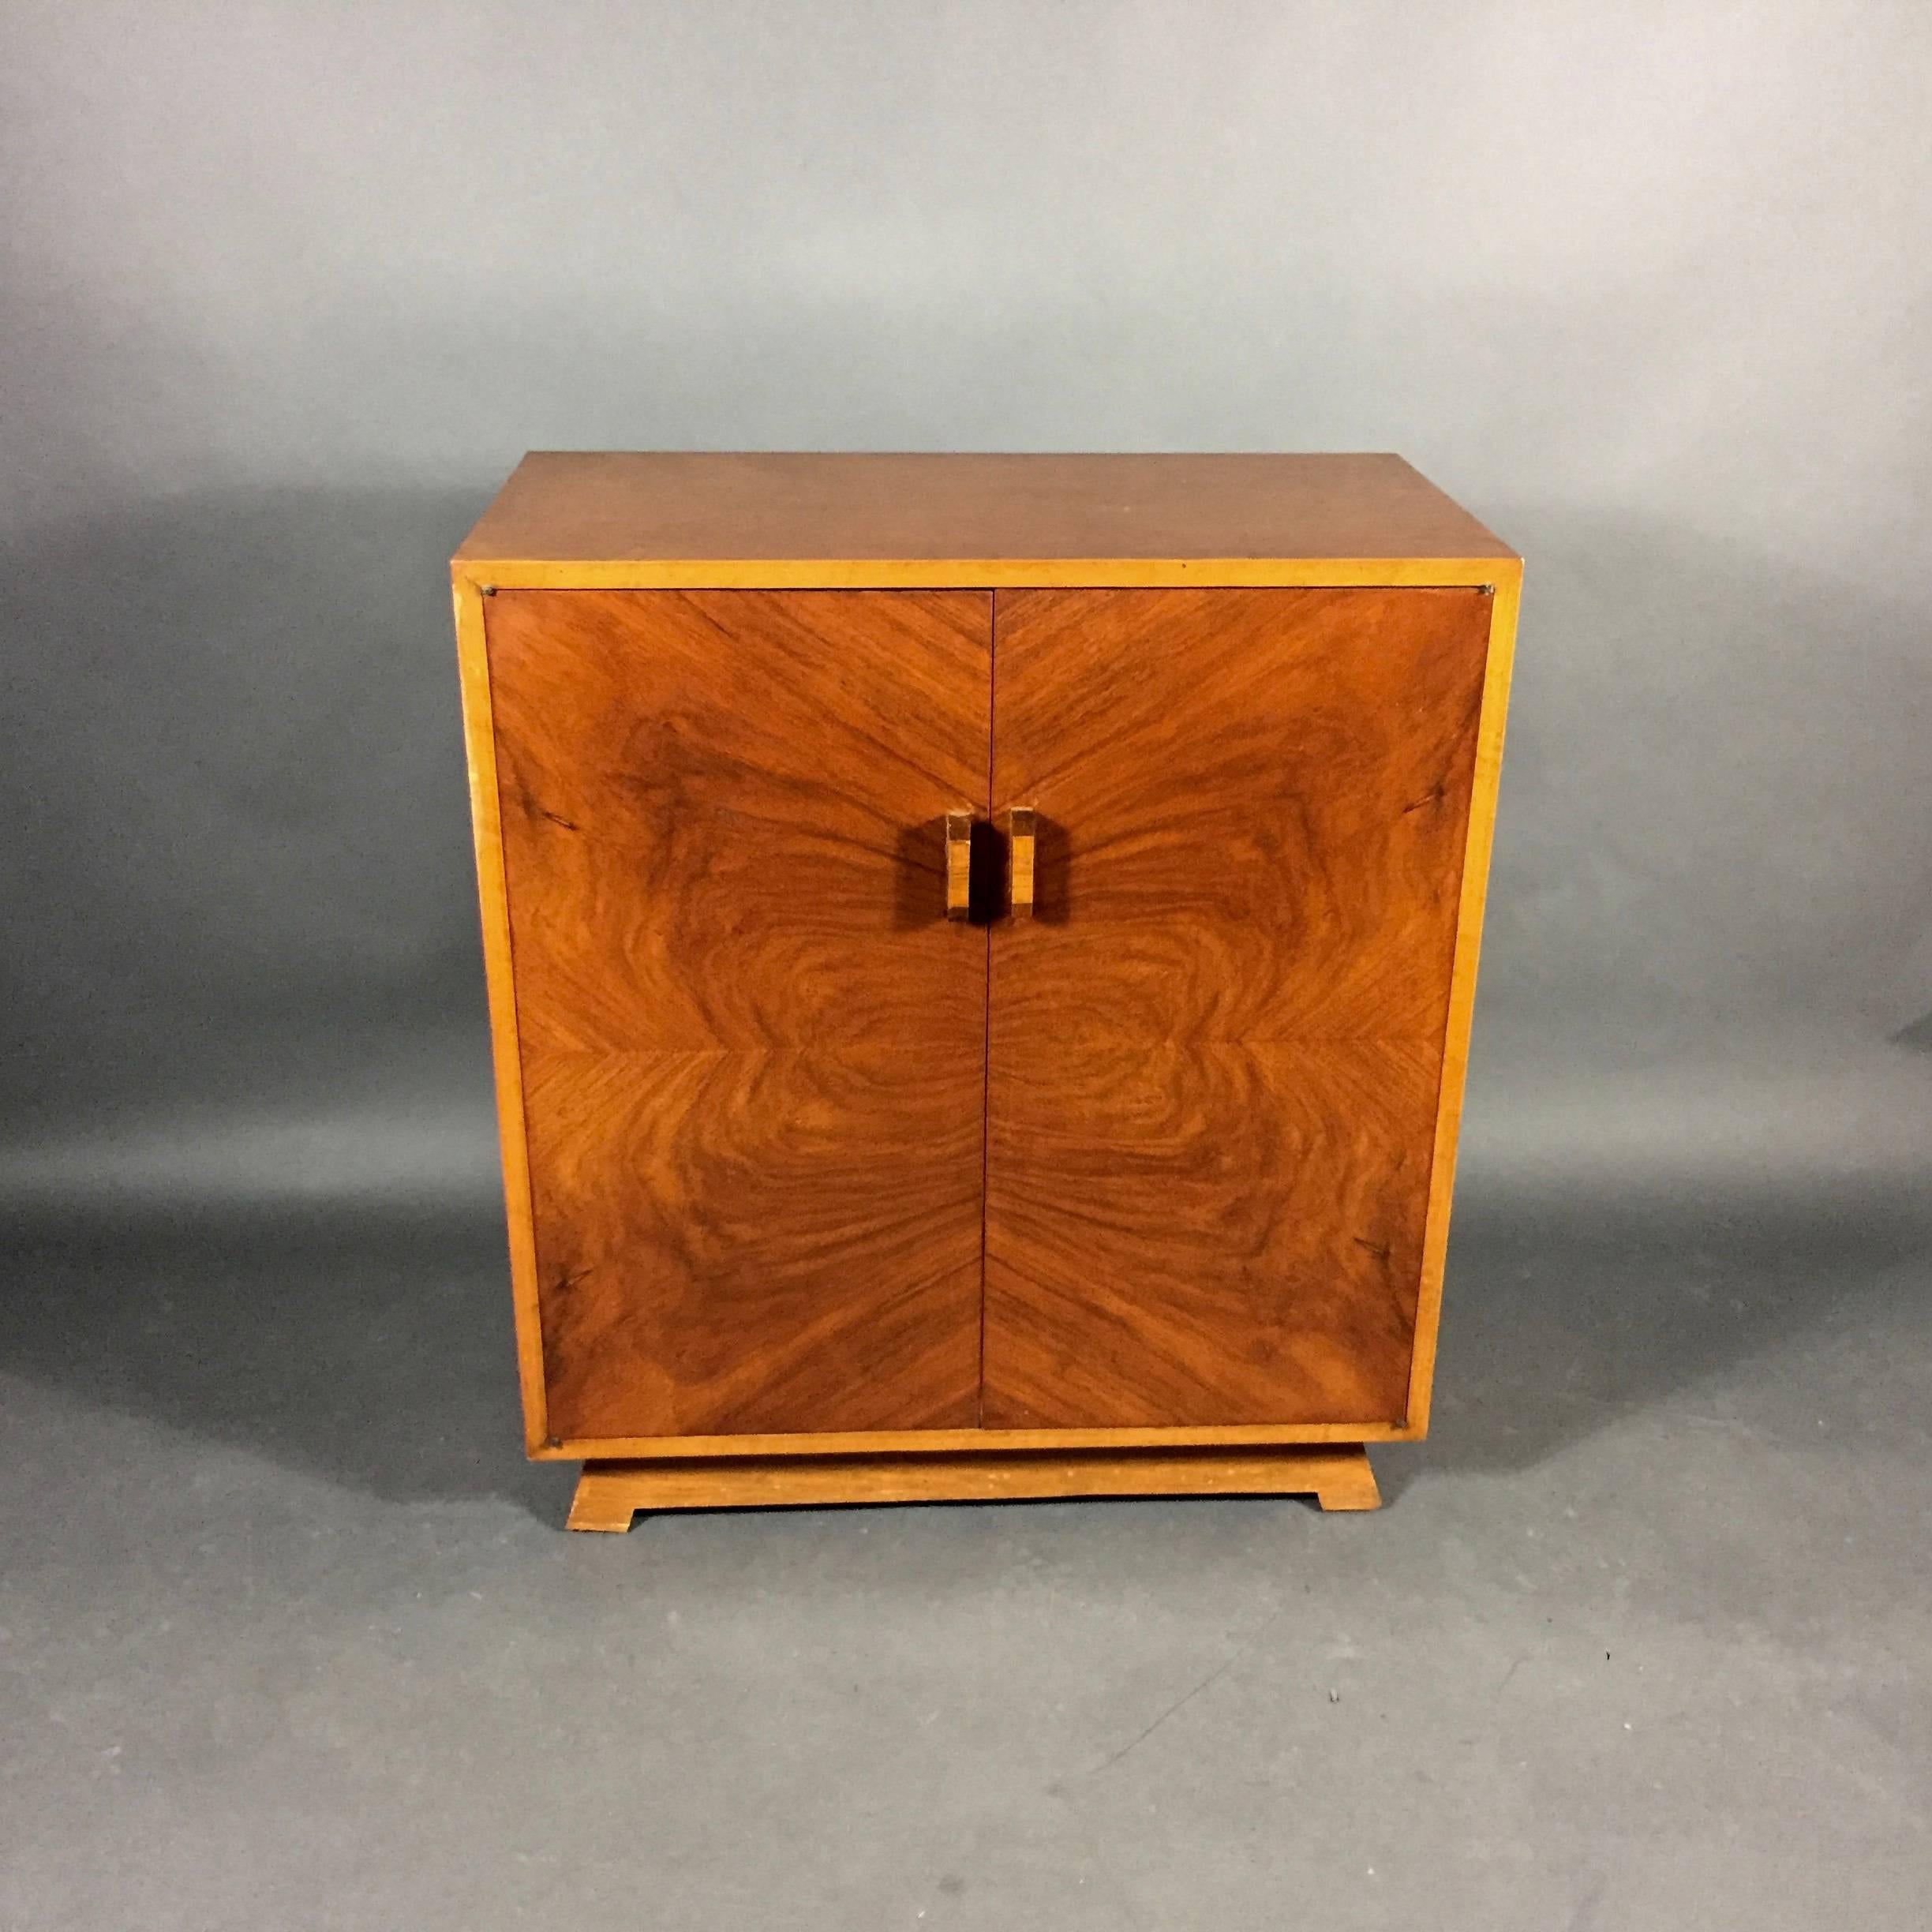 A nicely designed Art Deo period cabinet with quartered burled walnut veneer door fronts from Sweden. Perfectly balanced contrast veneer door pulls and Classic deco angled base. Very sweet touch of brass floral design at four corners of doors at